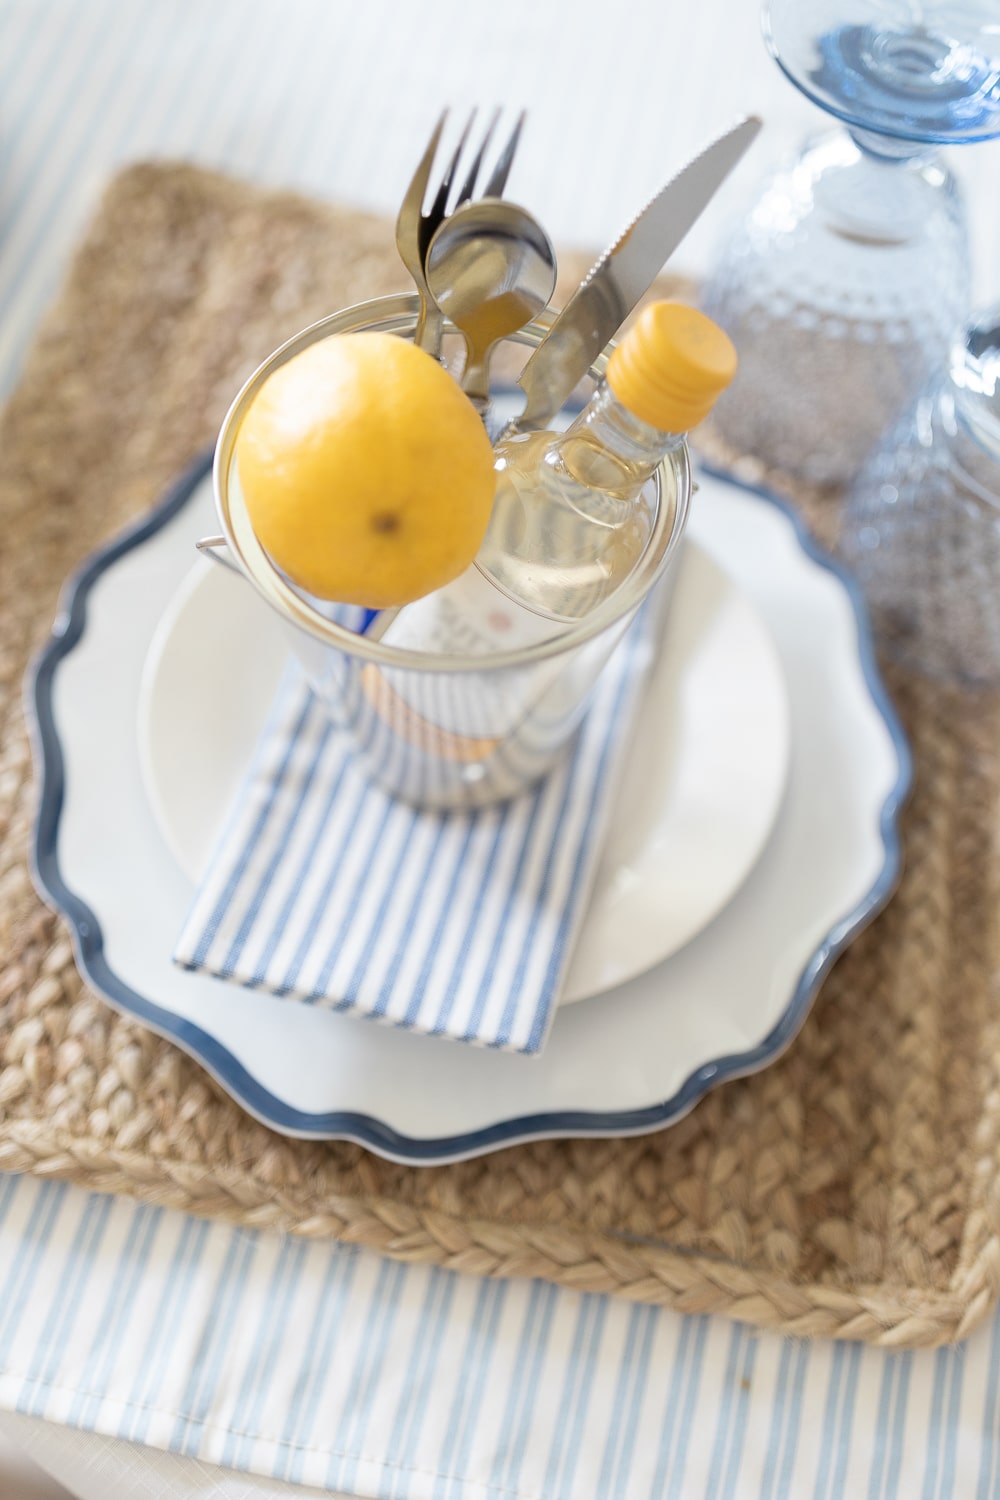 Individual clambake party place settings using clear mini buckets, lemons, and bottles of miniature Sutter Home wine designed by blogger Stephanie Ziajka on Diary of a Debutante